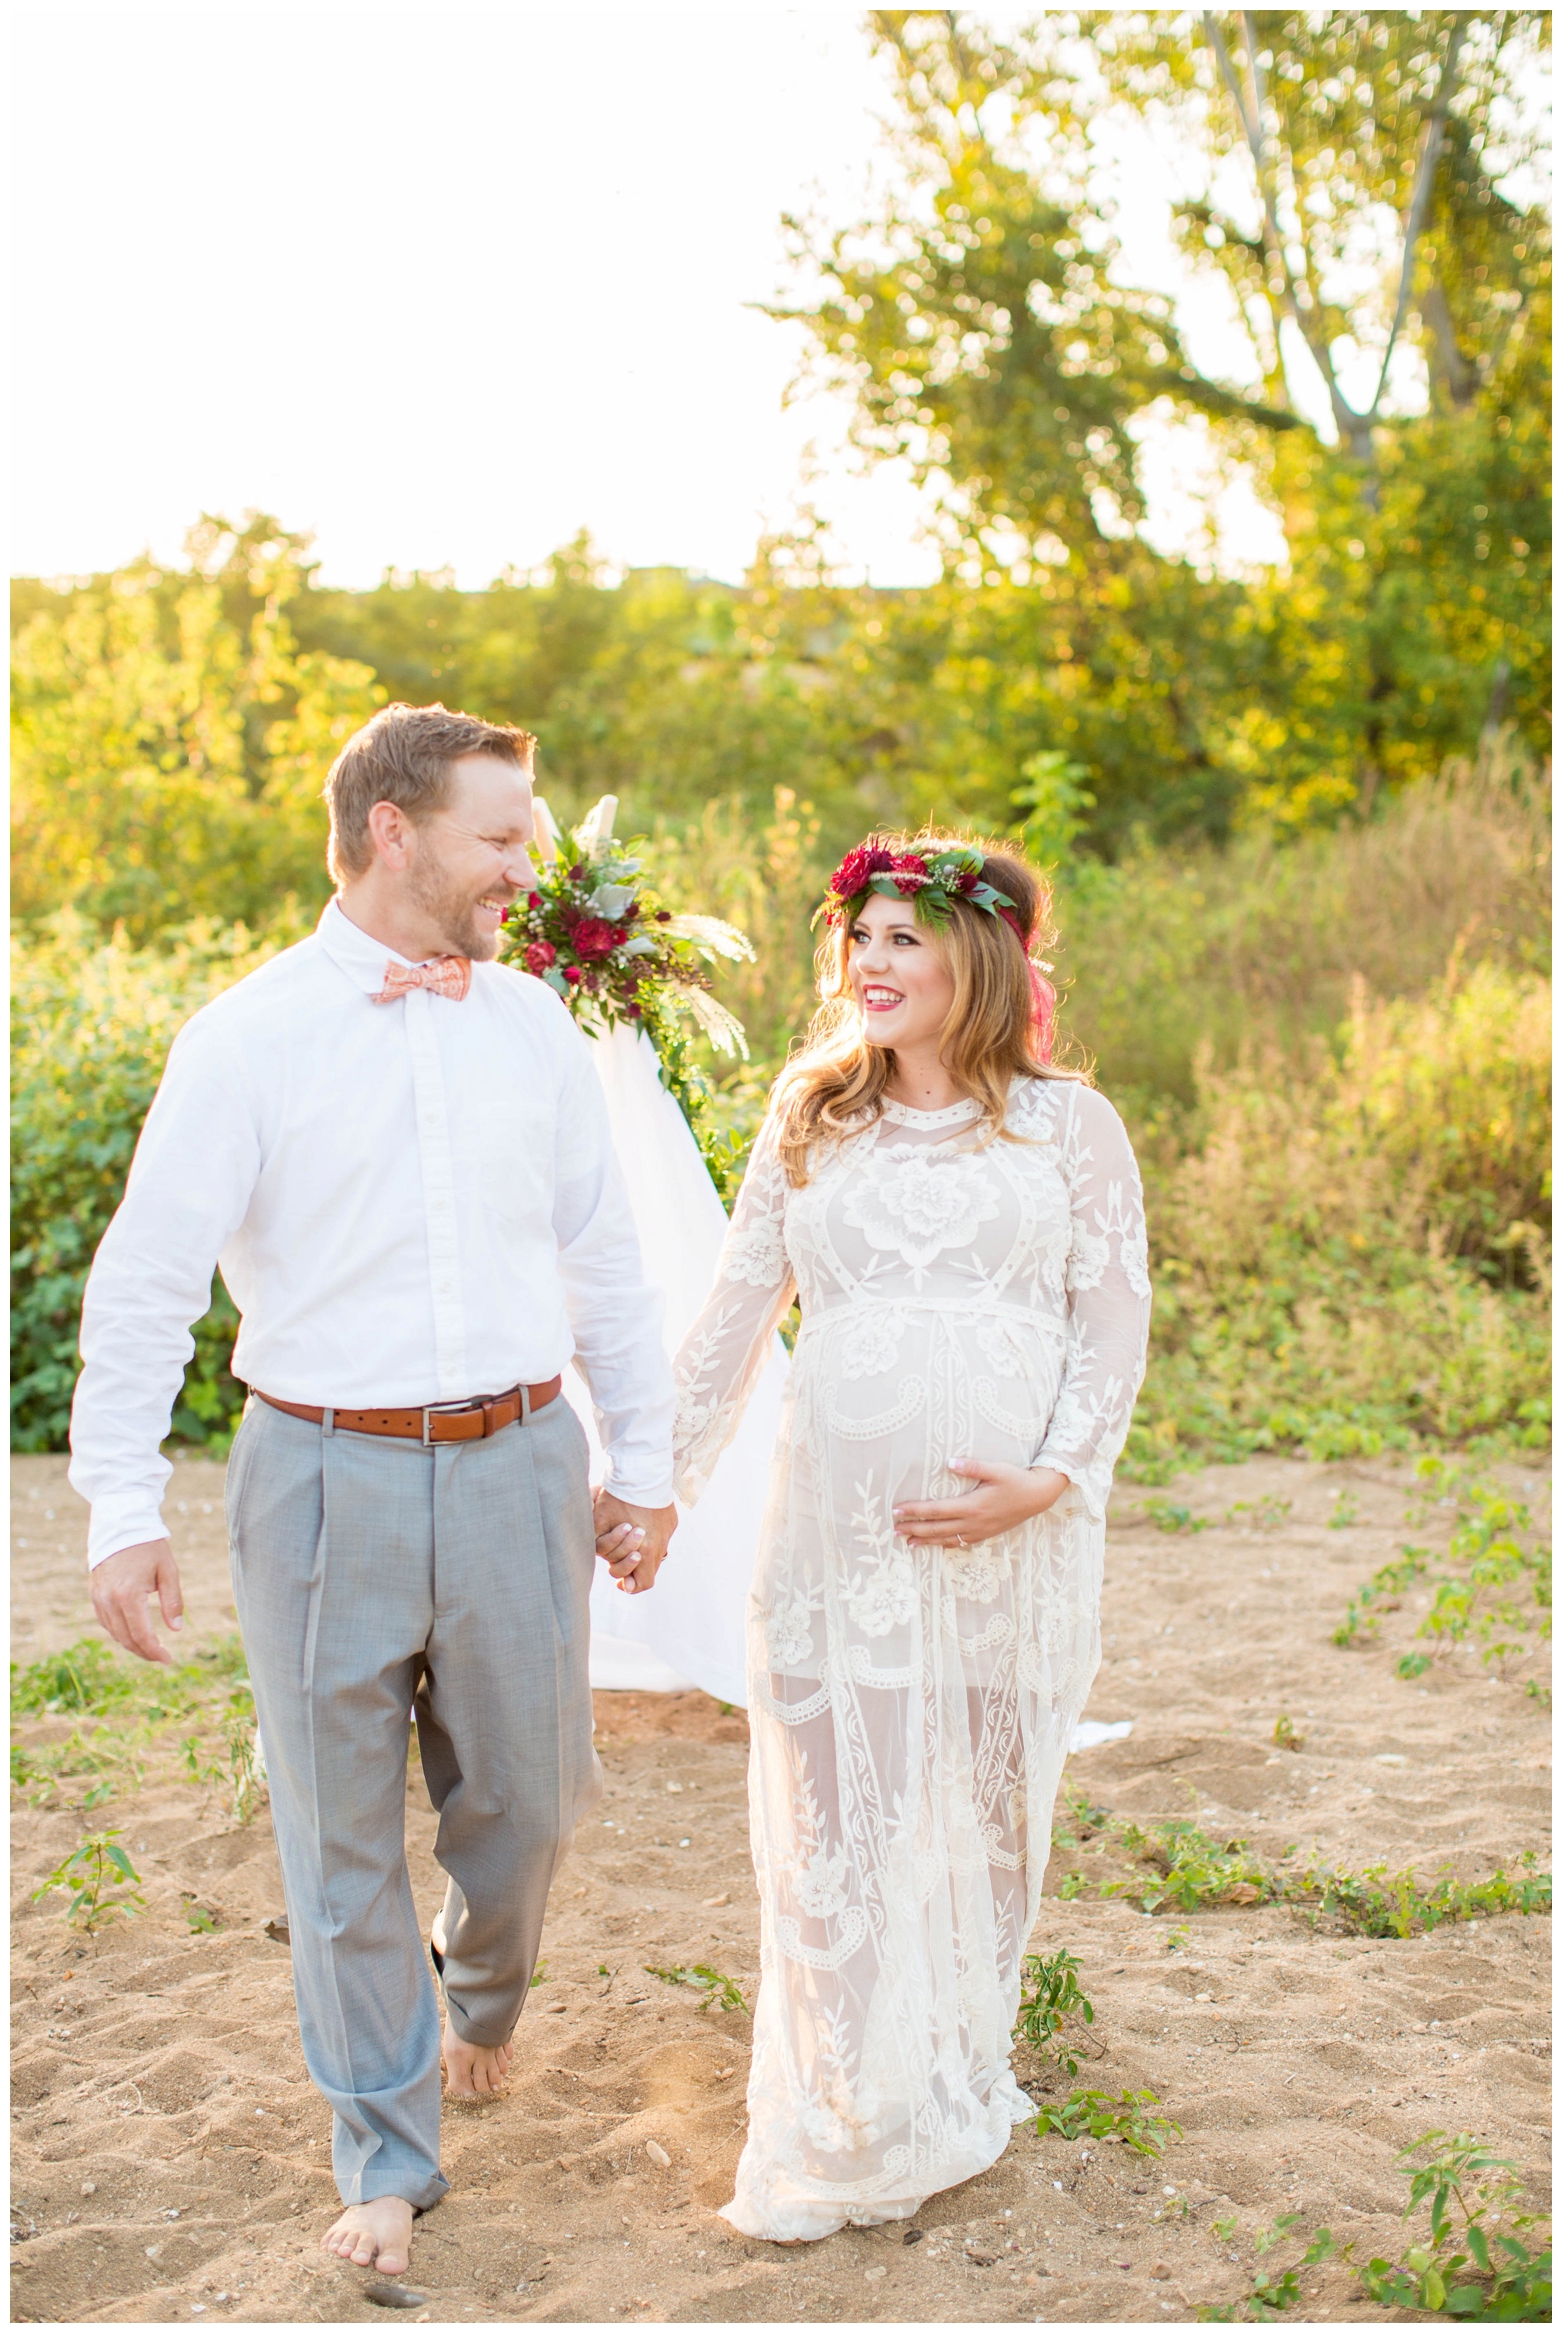 View More: http://hopetaylorphotographyphotos.pass.us/chelsey-maternity